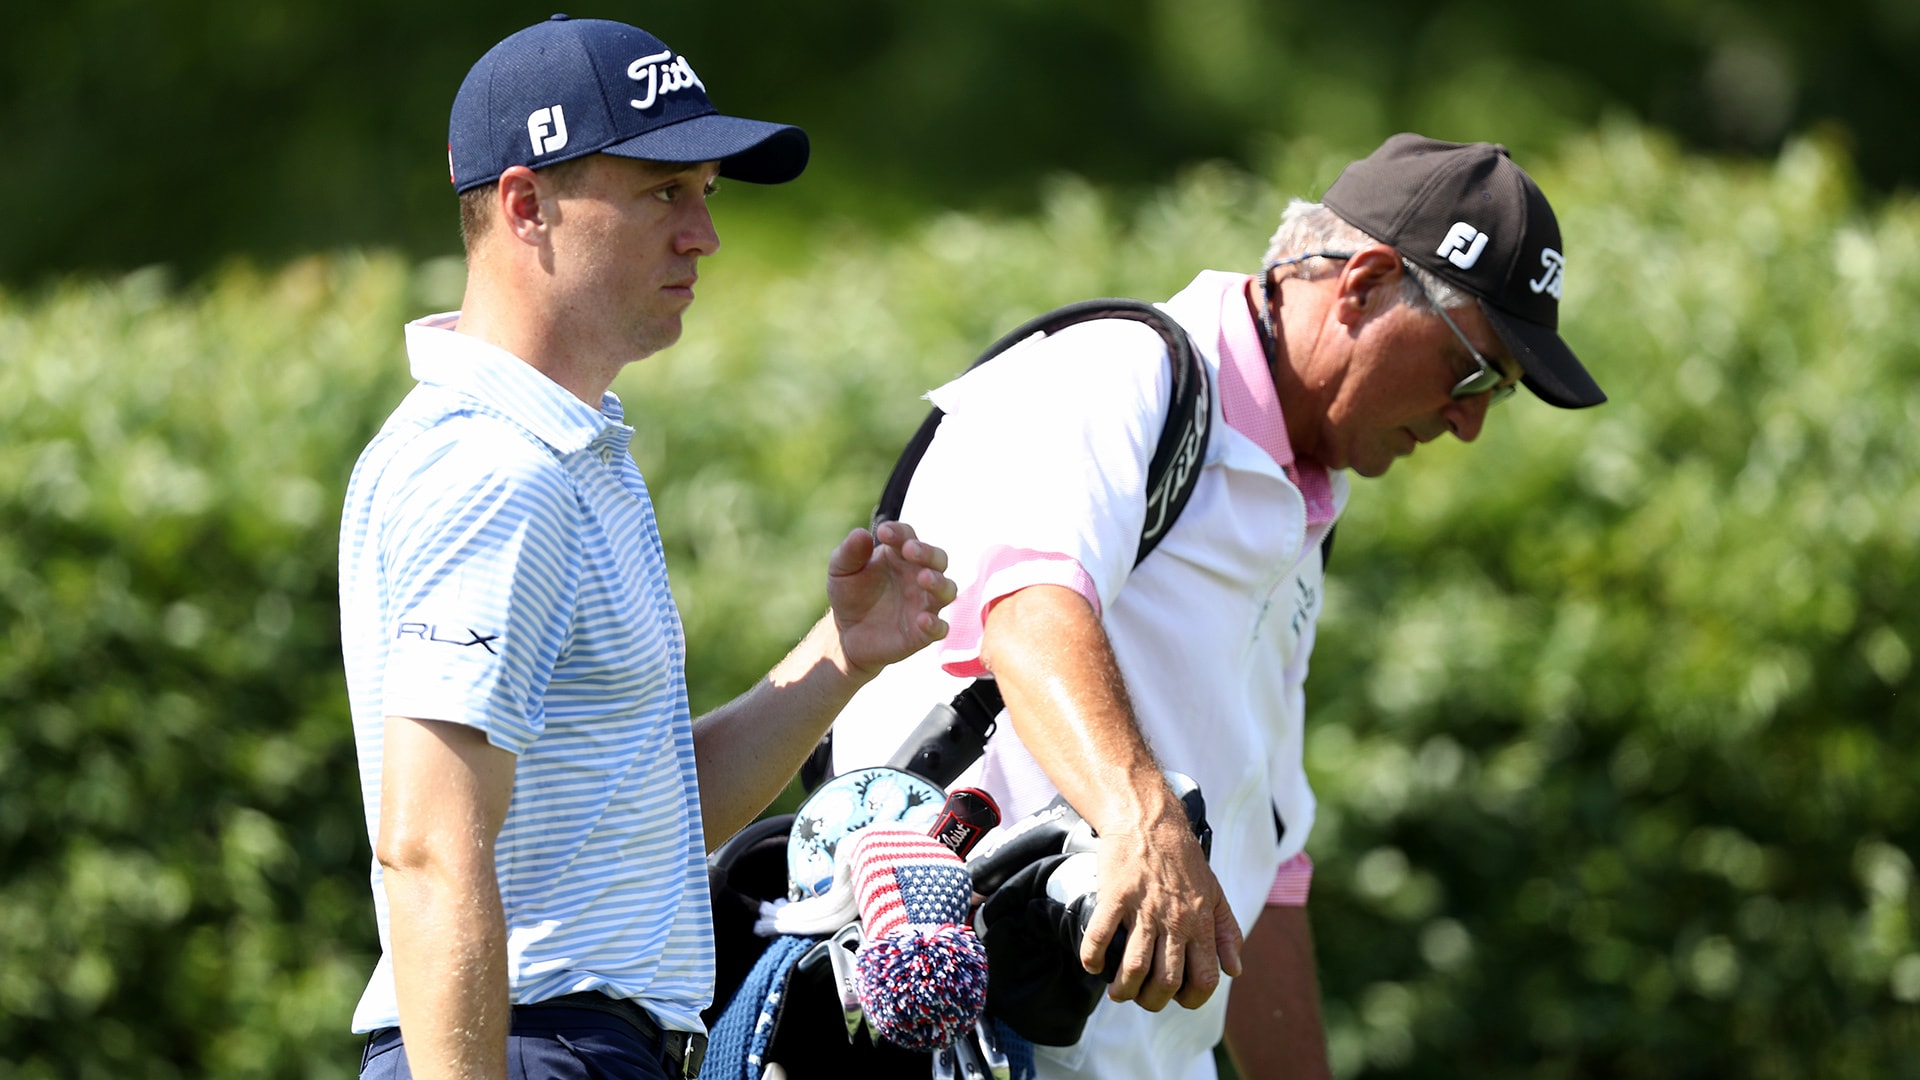 Mike Thomas caddies for son Justin Thomas after regular looper leaves with dizziness